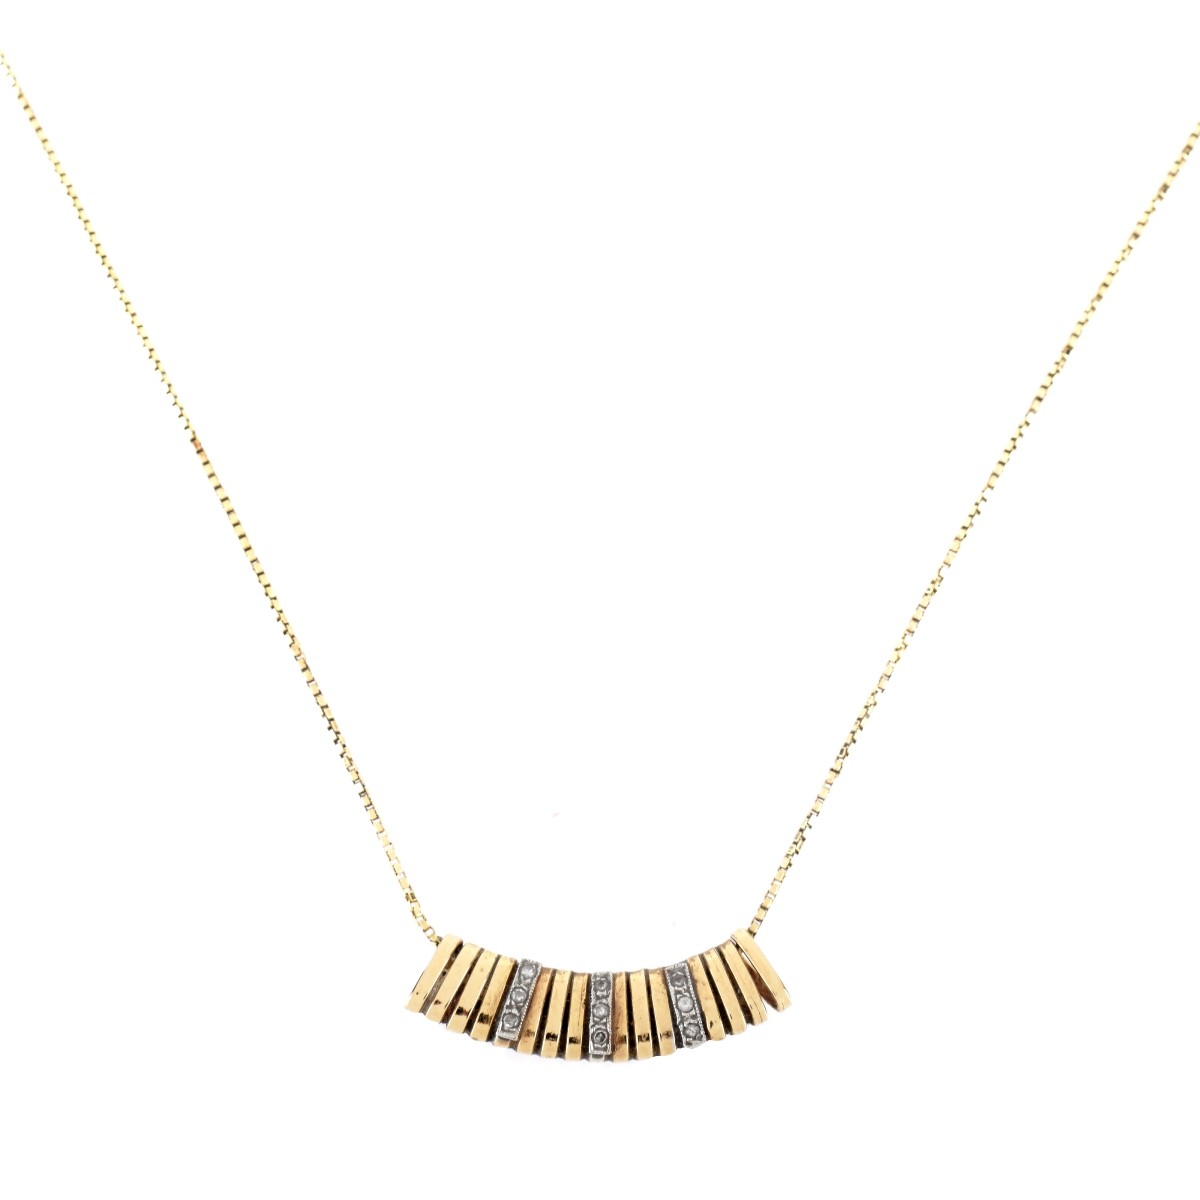 Delicate 14K and Diamond Necklace